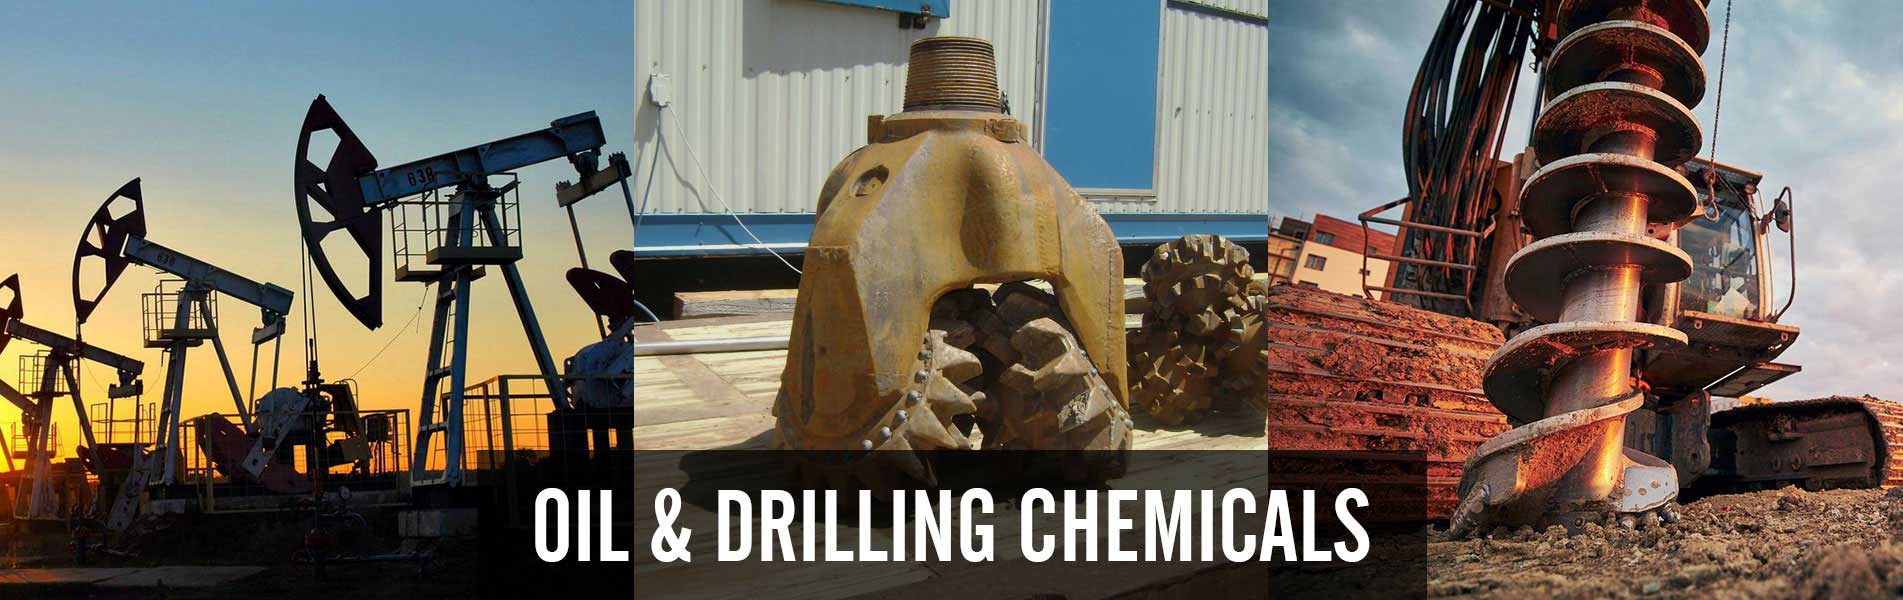 Oil-&-Drilling-Chemicals